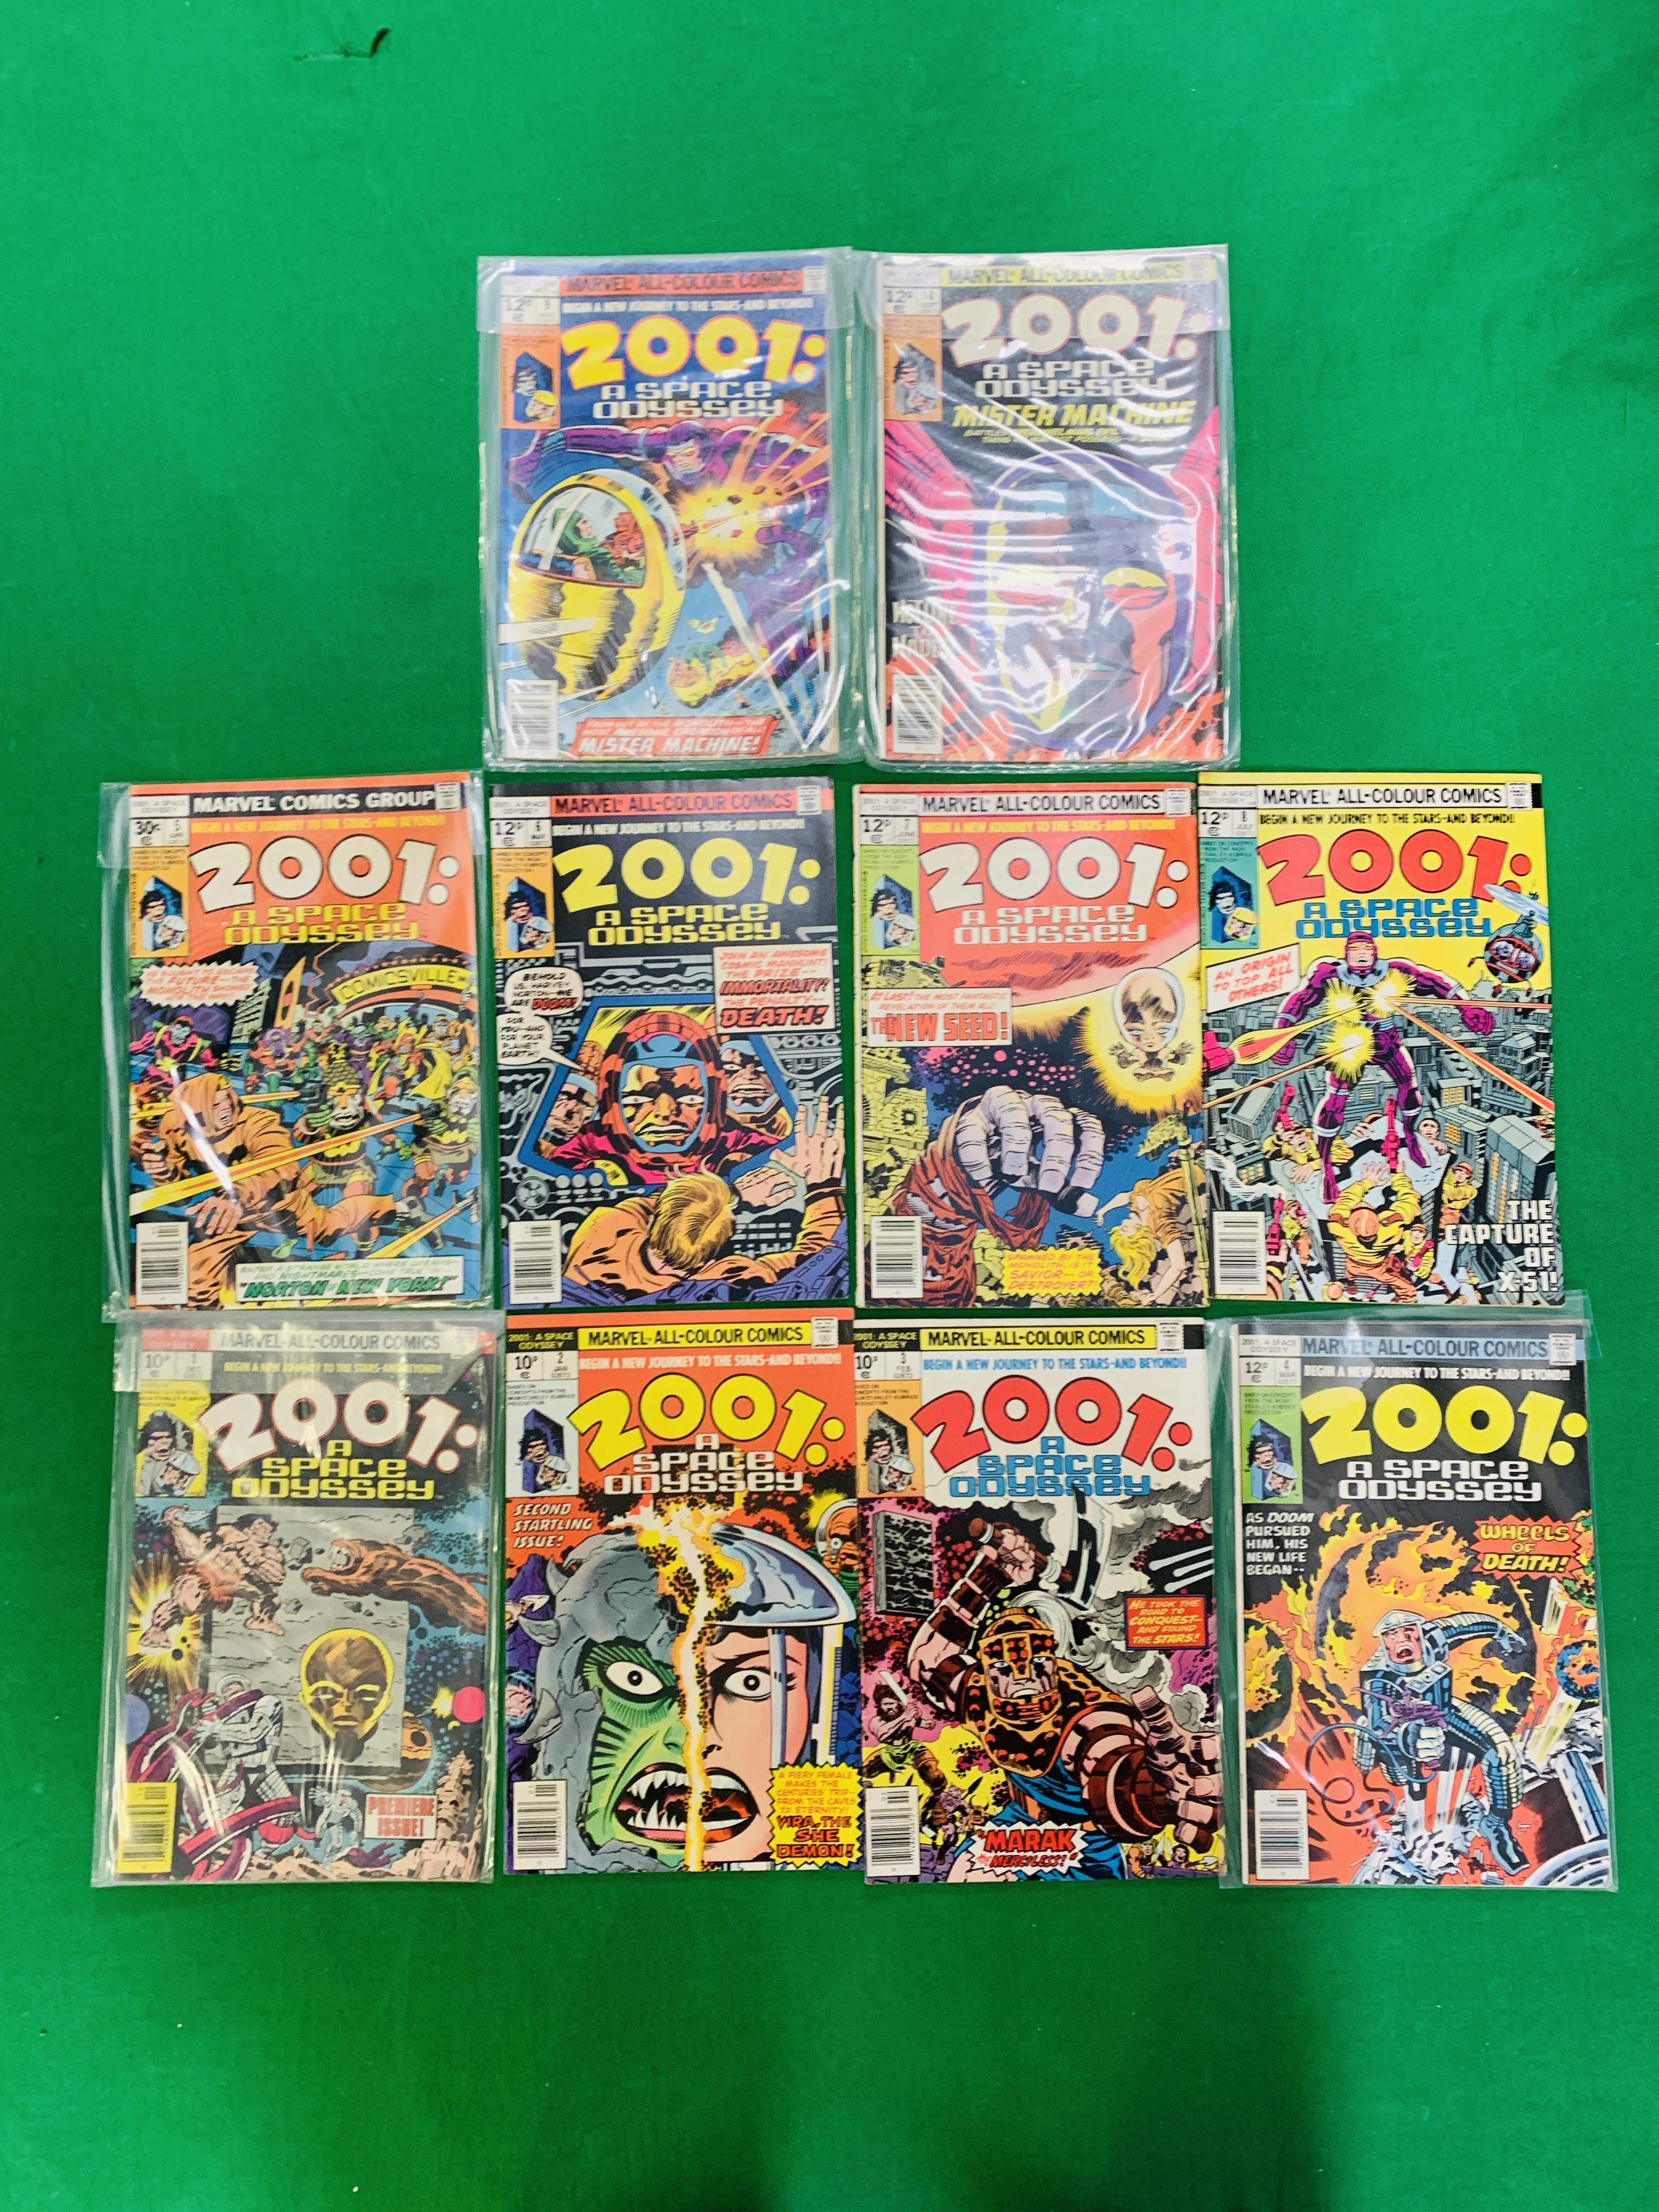 MARVEL COMICS 2001: A SPACE ODYSSEY NO. 1 - 10 FROM 1976, FIRST APPEARANCE NO. 8. MACHINE MAN X-51.